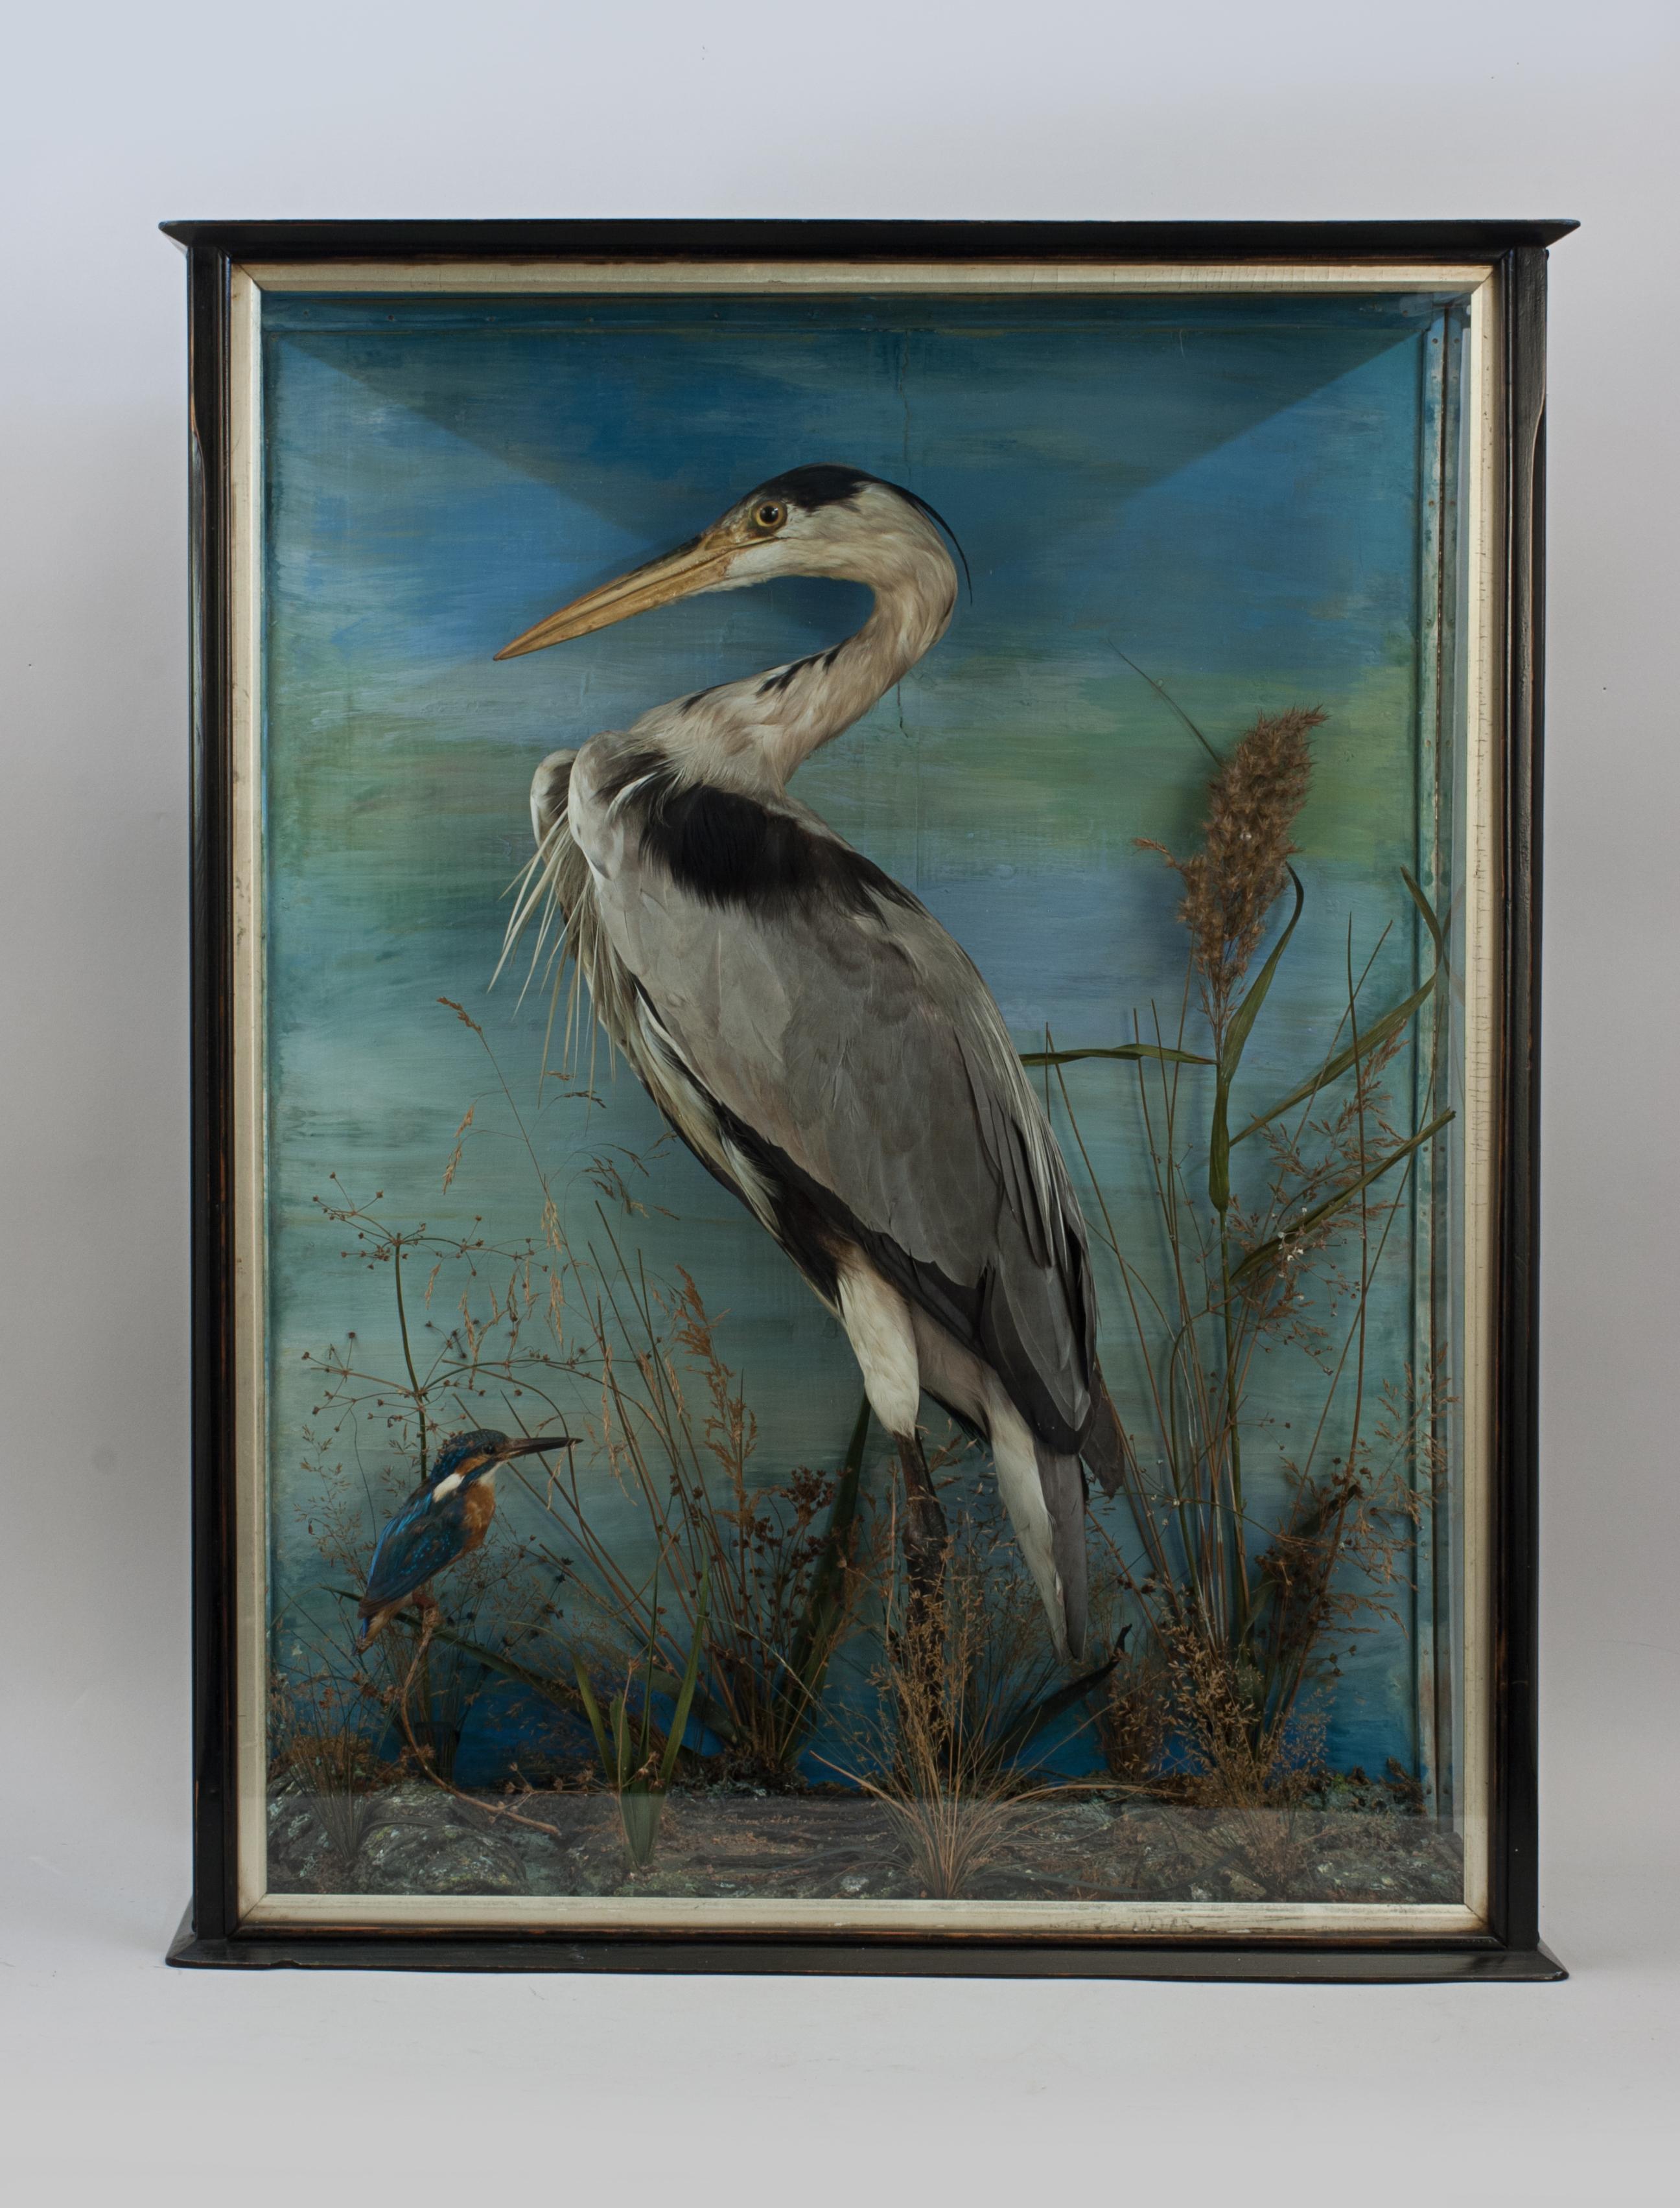 Vintage Taxidermy, Heron and Kingfisher.
A well prepared piece of taxidermy of a Heron and Kingfisher mounted in a naturalistic setting. The birds are artistically modeled amongst fine groundwork all against a painted backdrop. The heron and